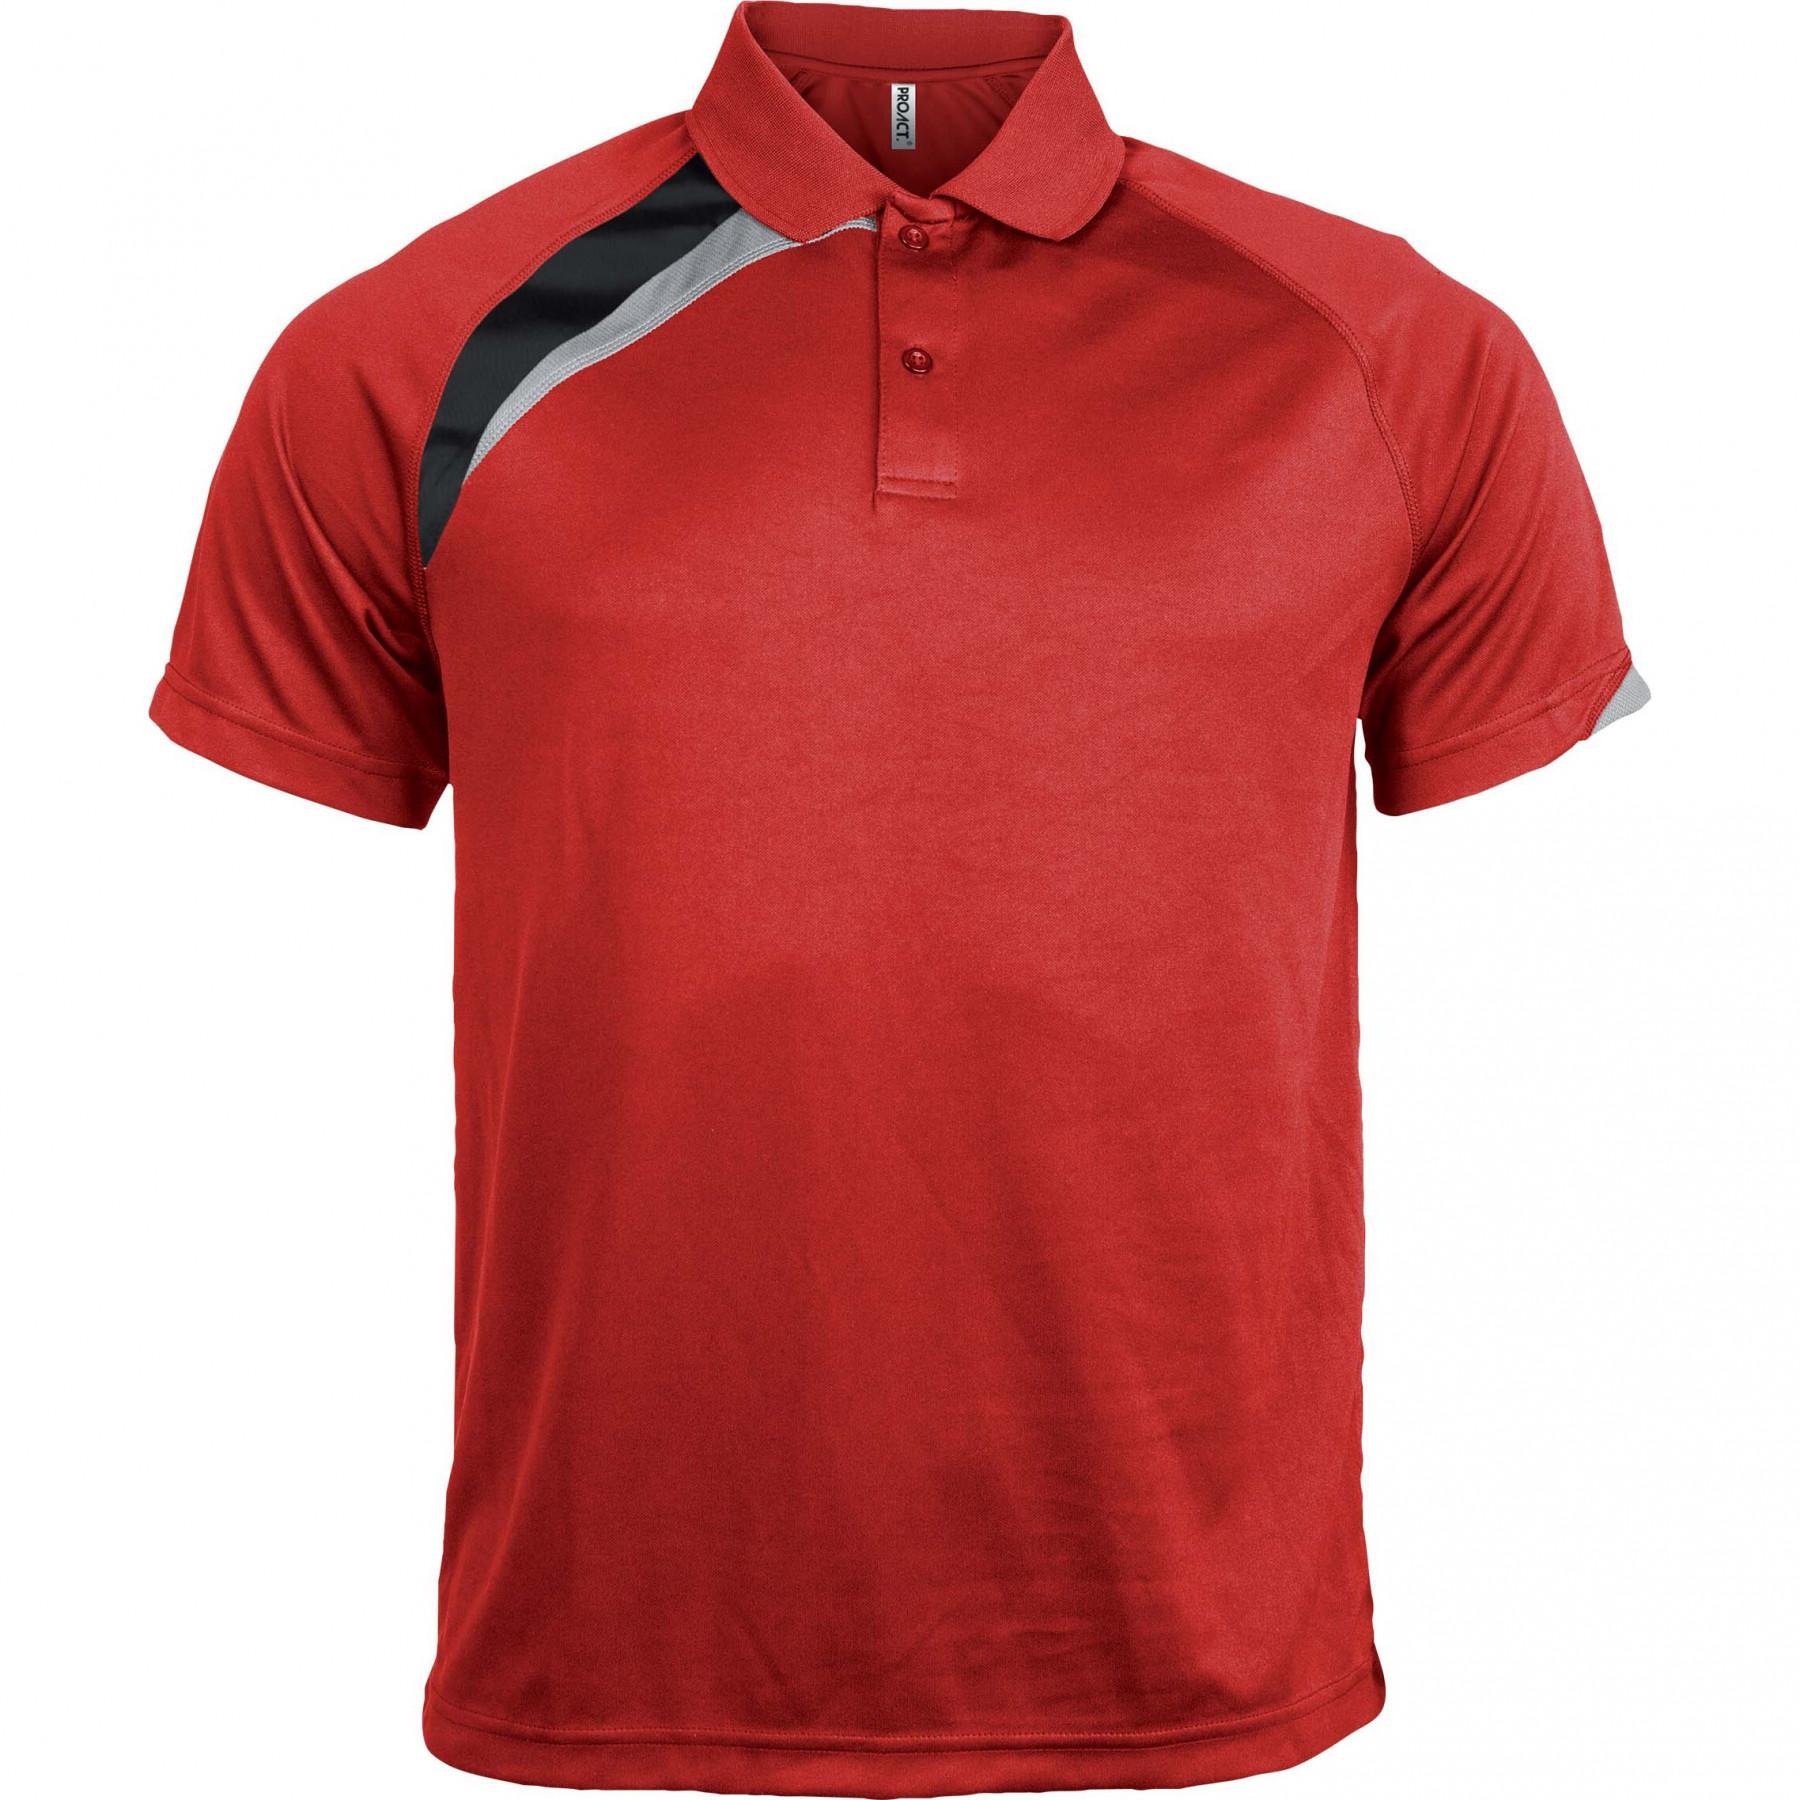 Polo child Proact Sport polyester